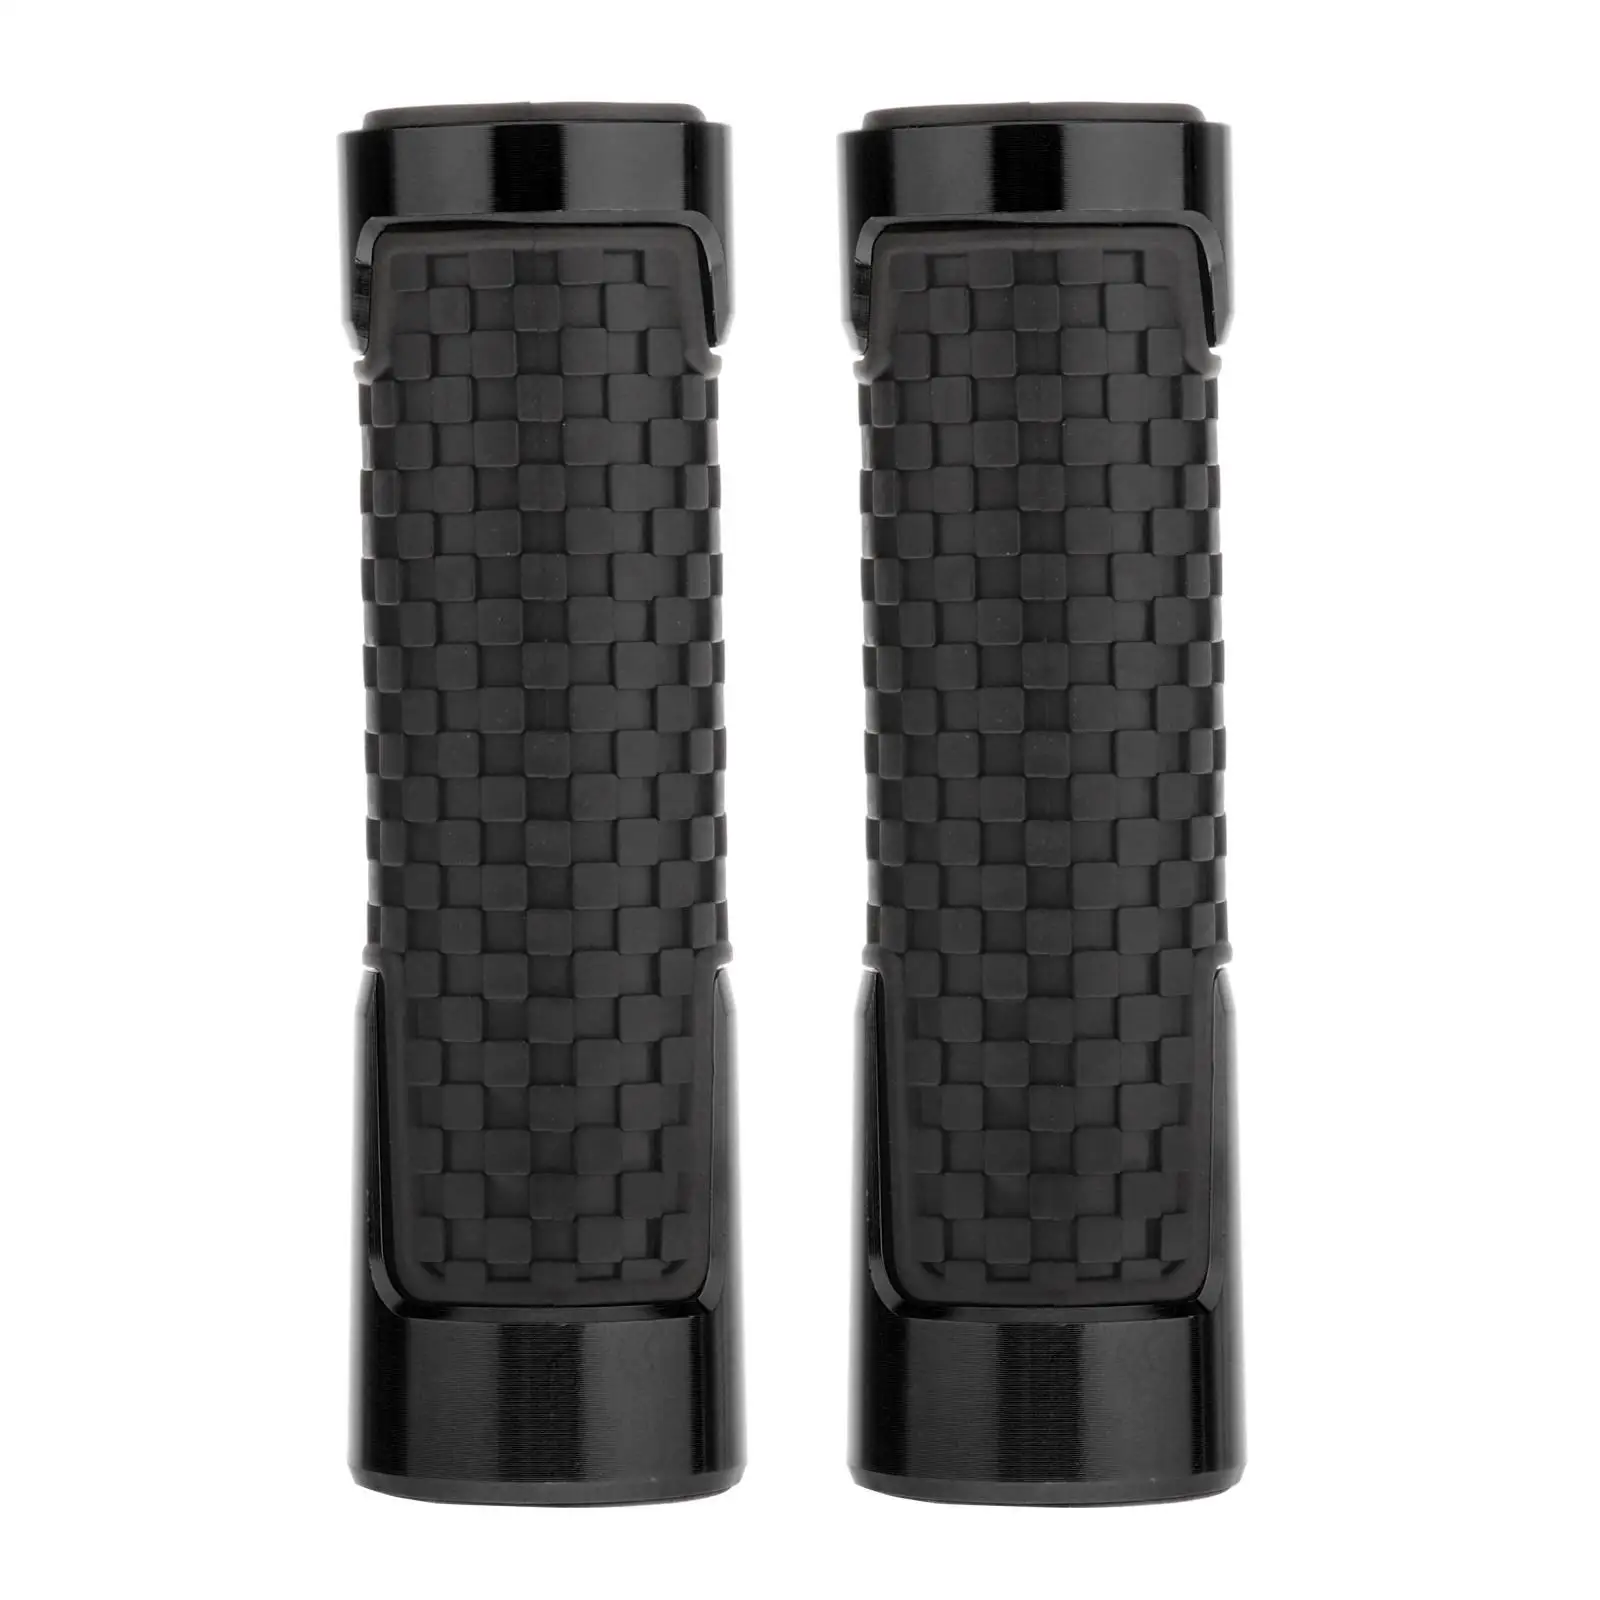 2x Motorcycle Hand Grips Motocycle Accessories Easily Replace Black/Golden